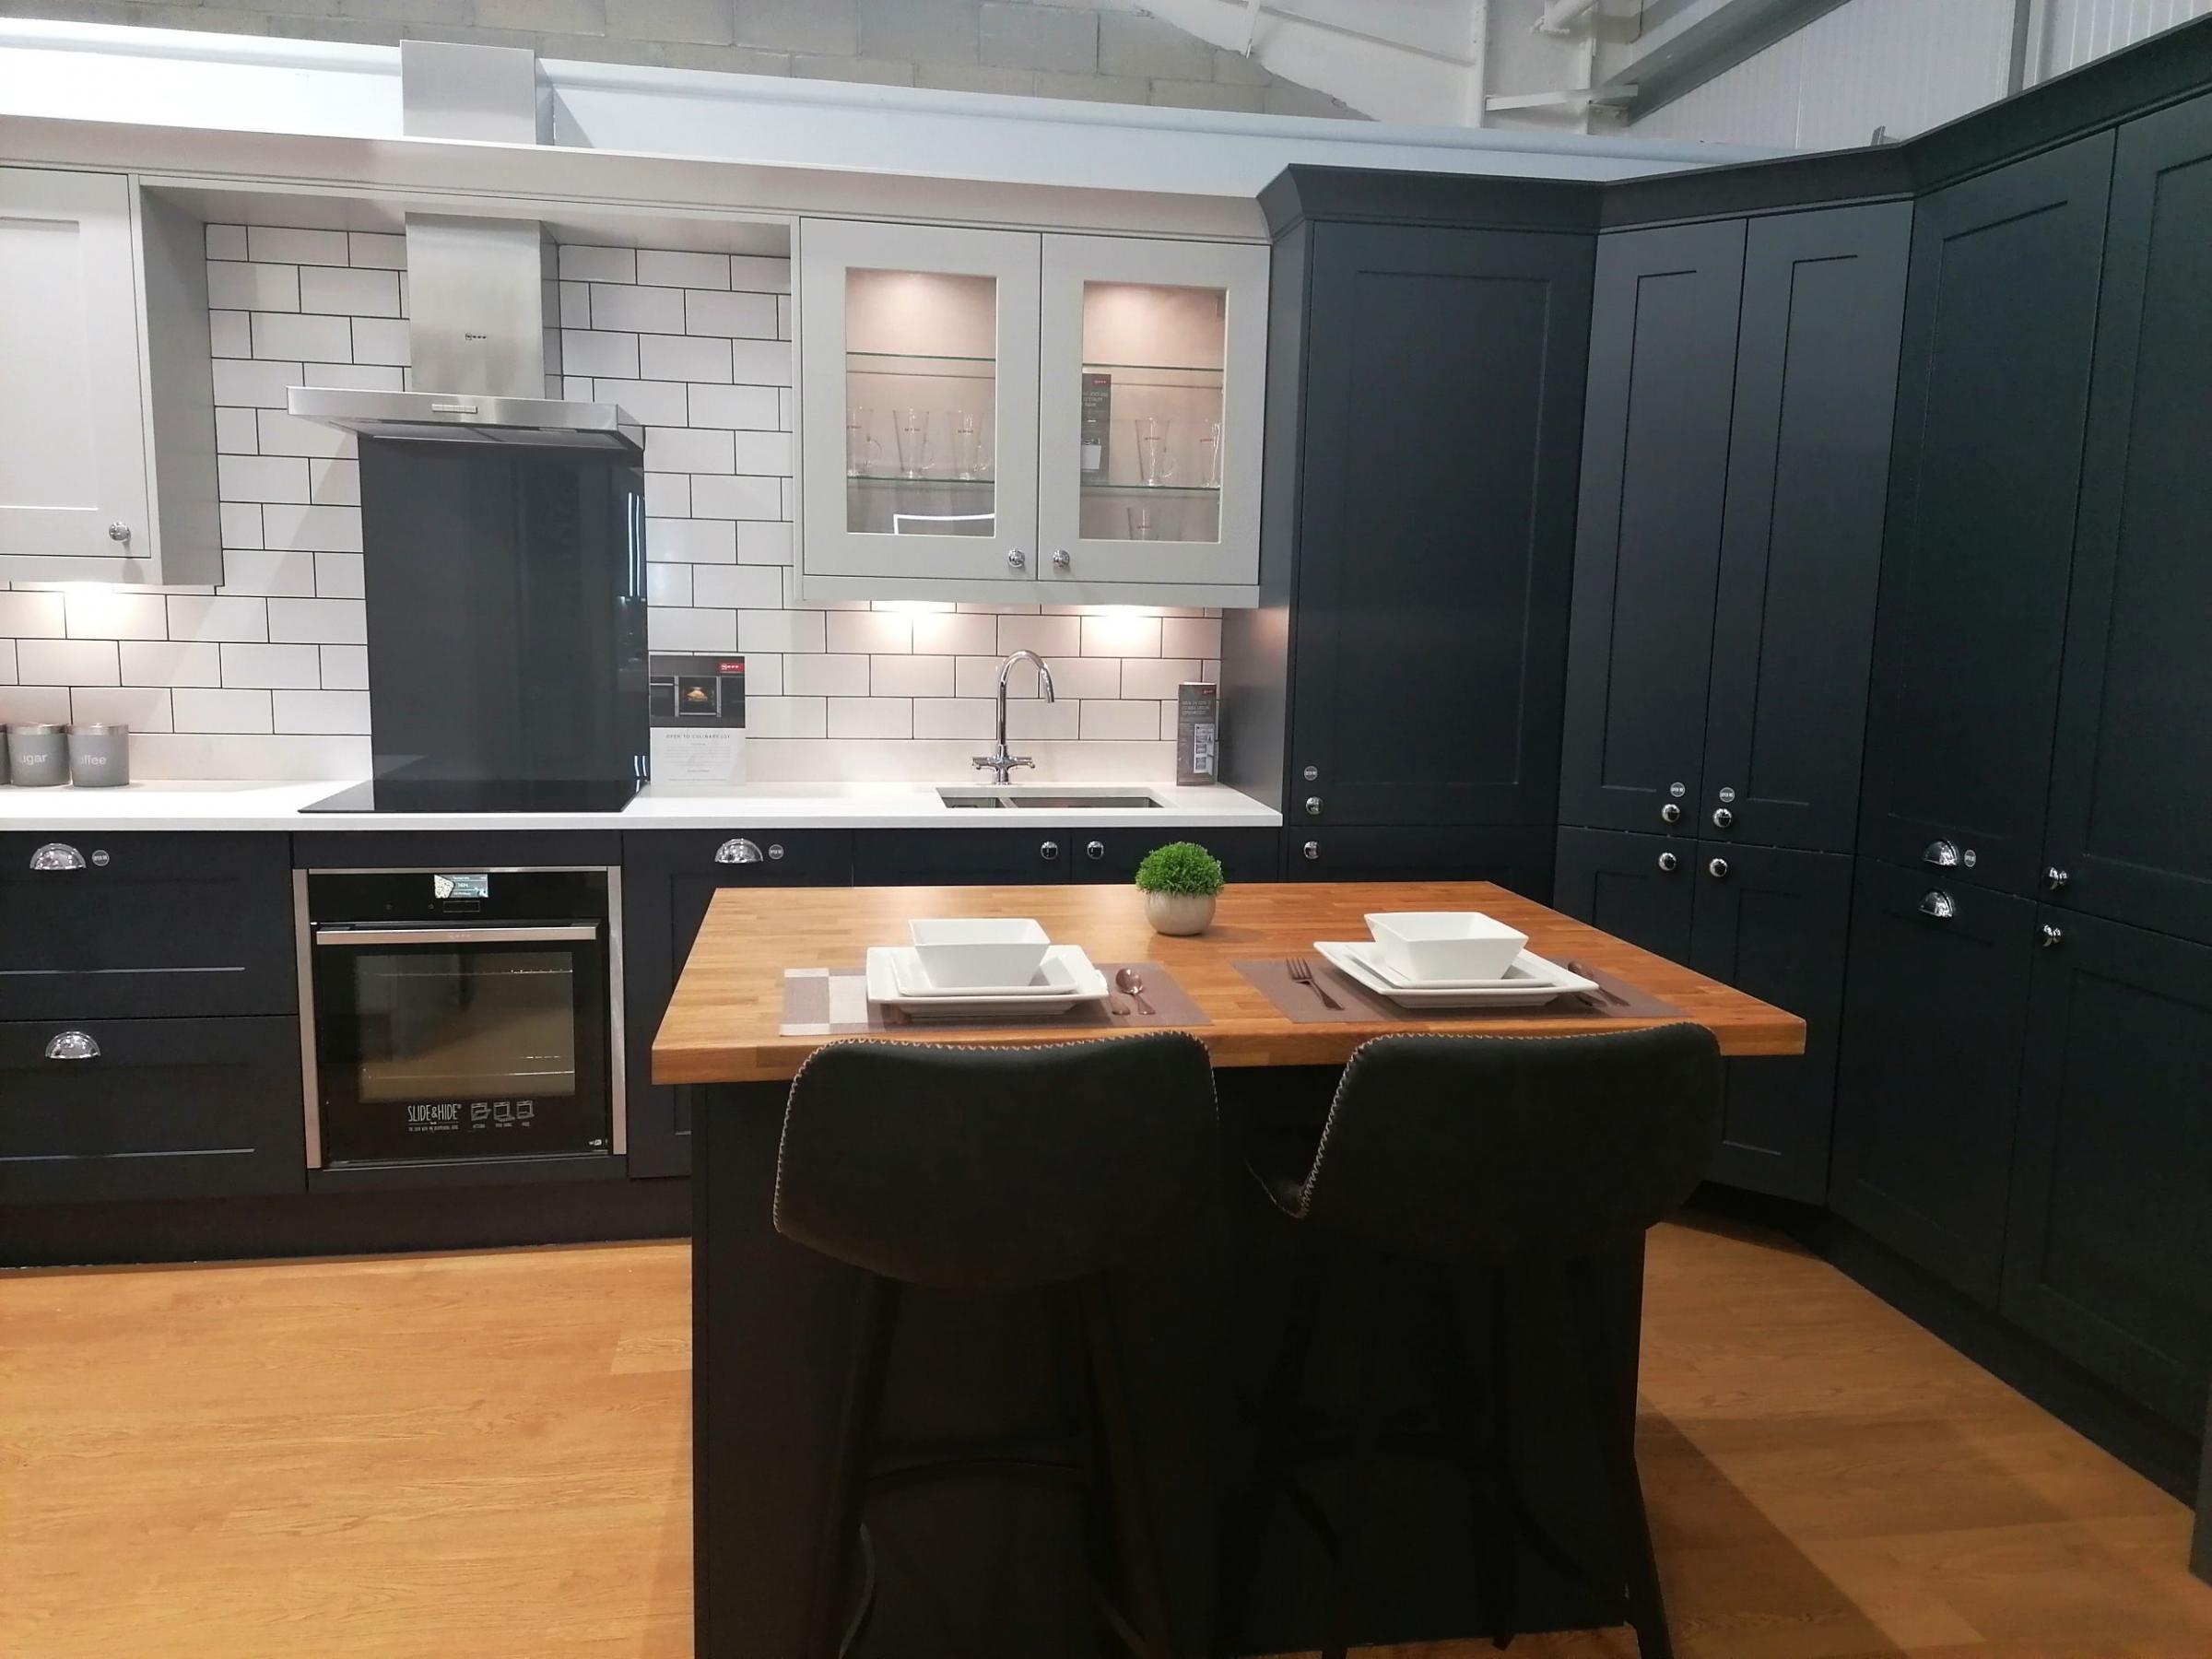 There are six kitchen set ups on display in the Helston branch